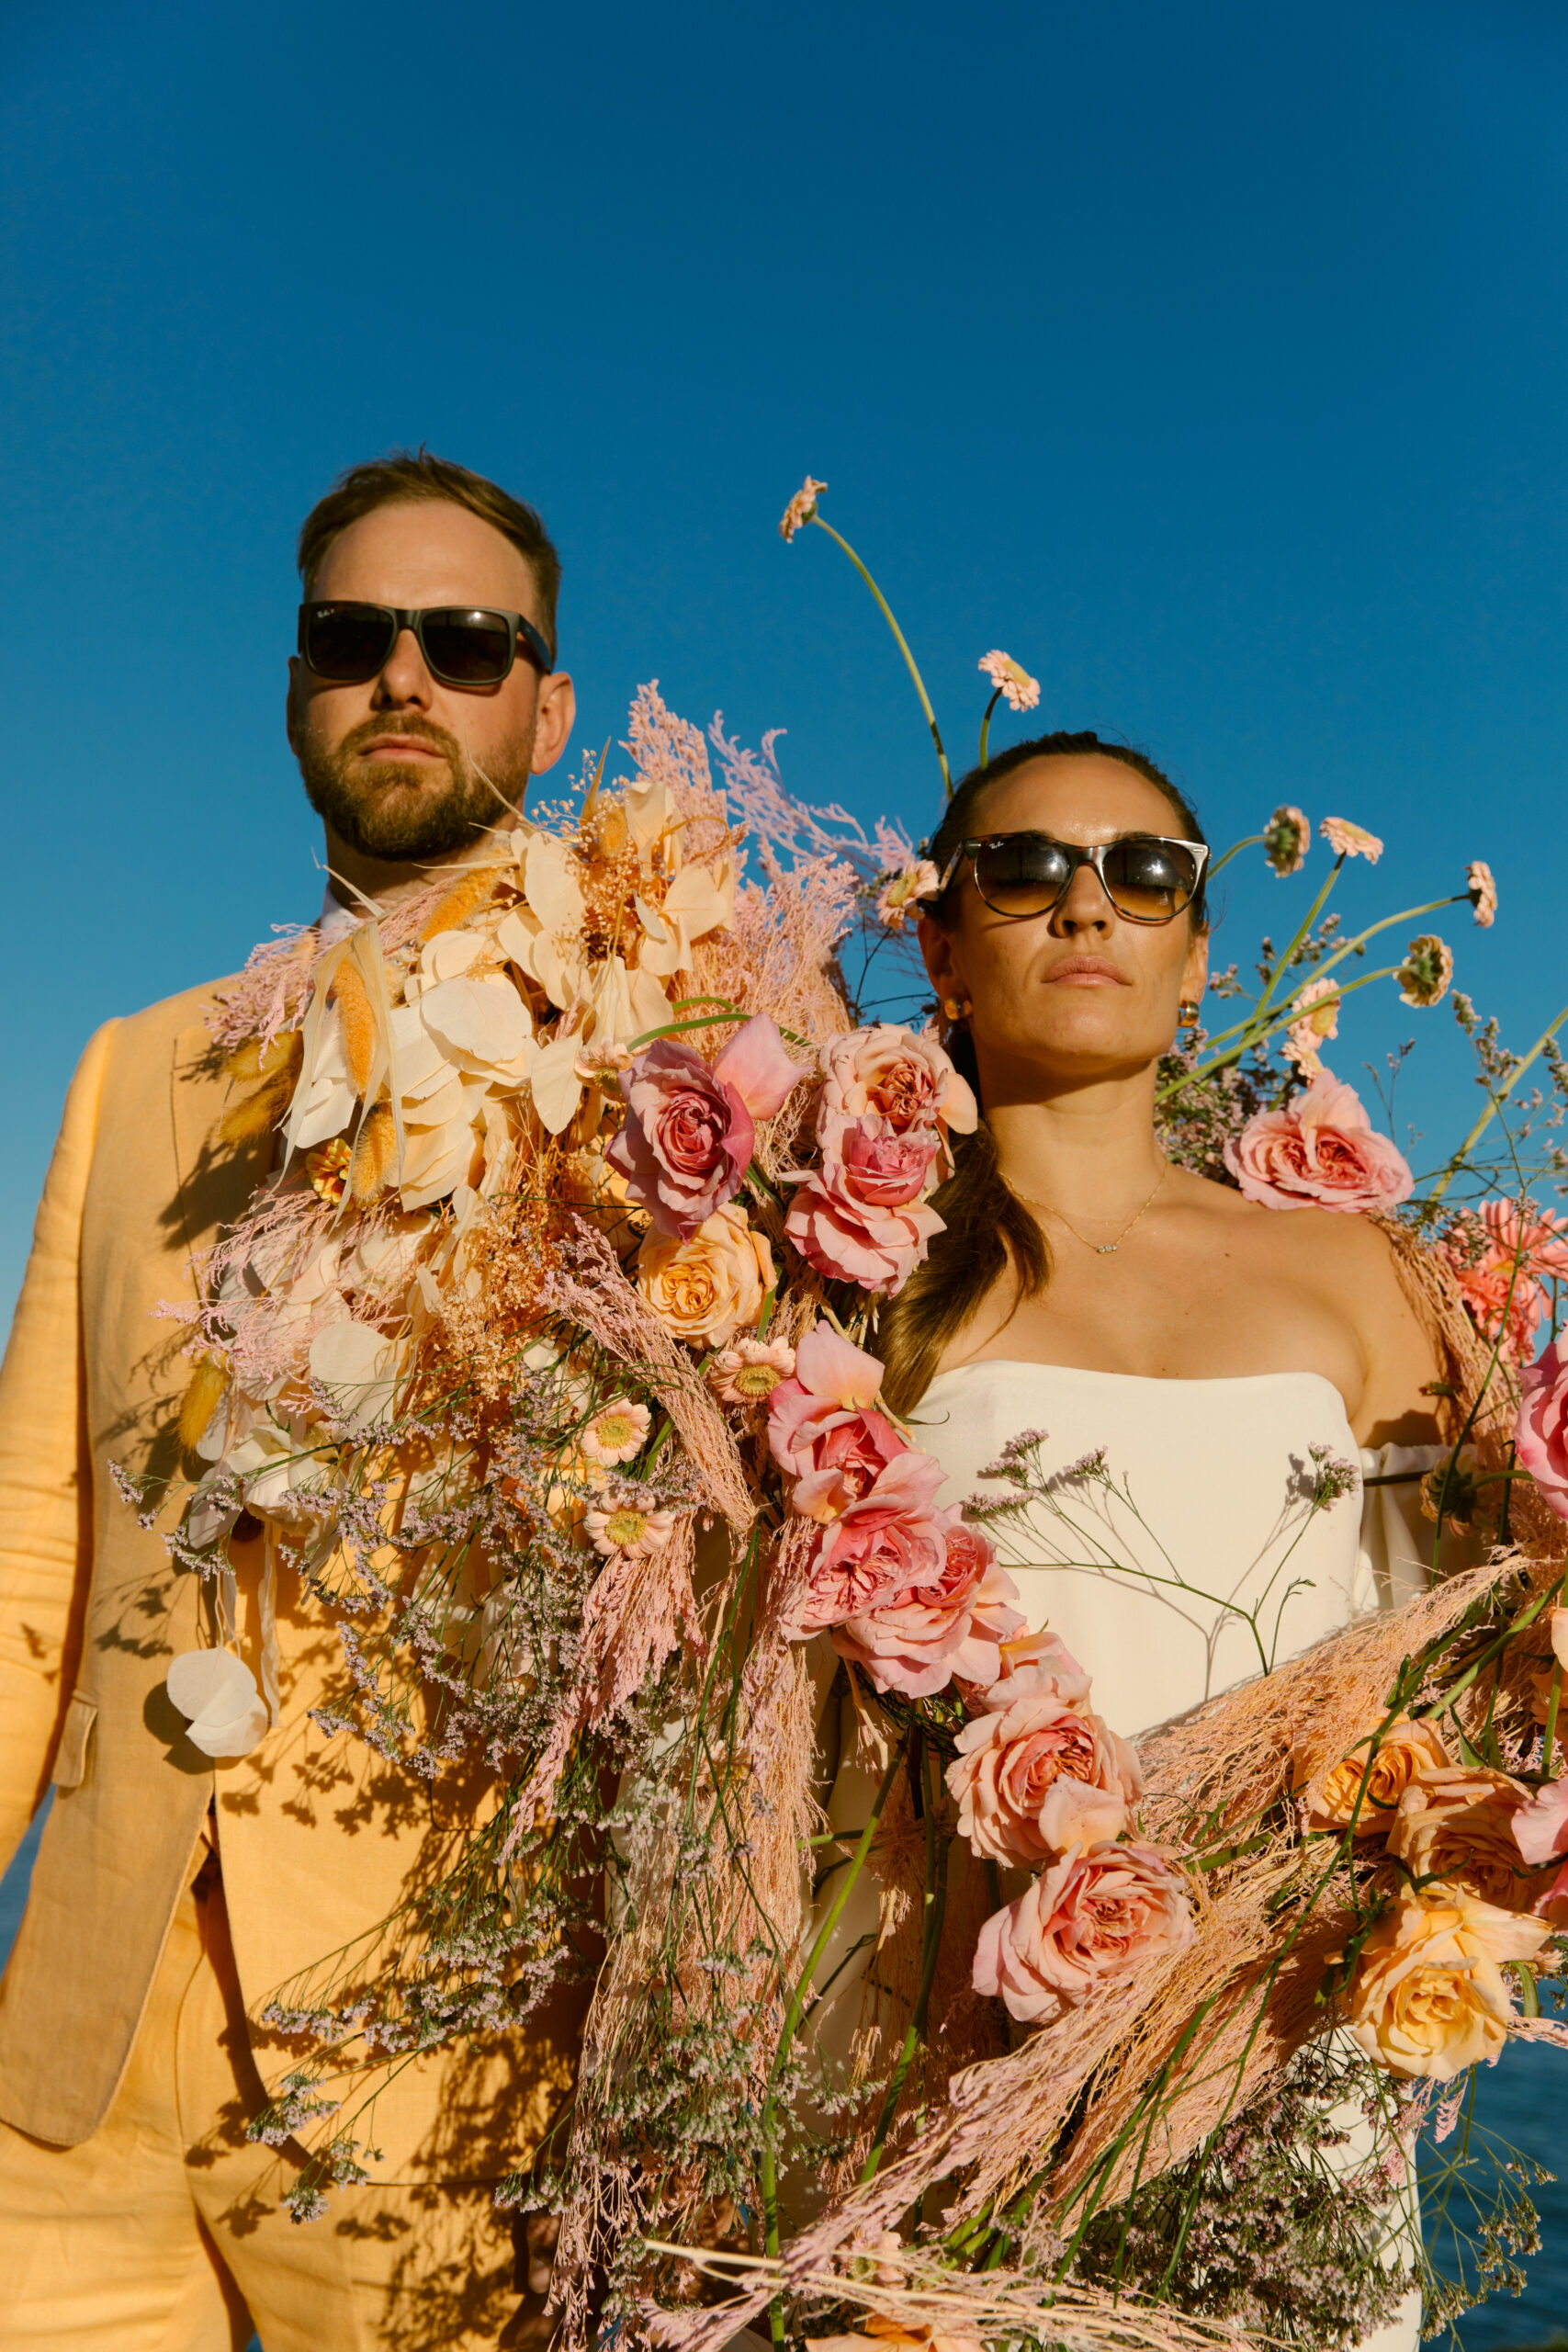 close up vogue inspired wedding portraits. bride and groom wrapped in colorful florals pinks oranges yellows dried florals roses daisies blue skies. verona gown strapless wedding dress kamperett. light orange linen groom suit cotswold tailors. bride and groom sunglasses portrait